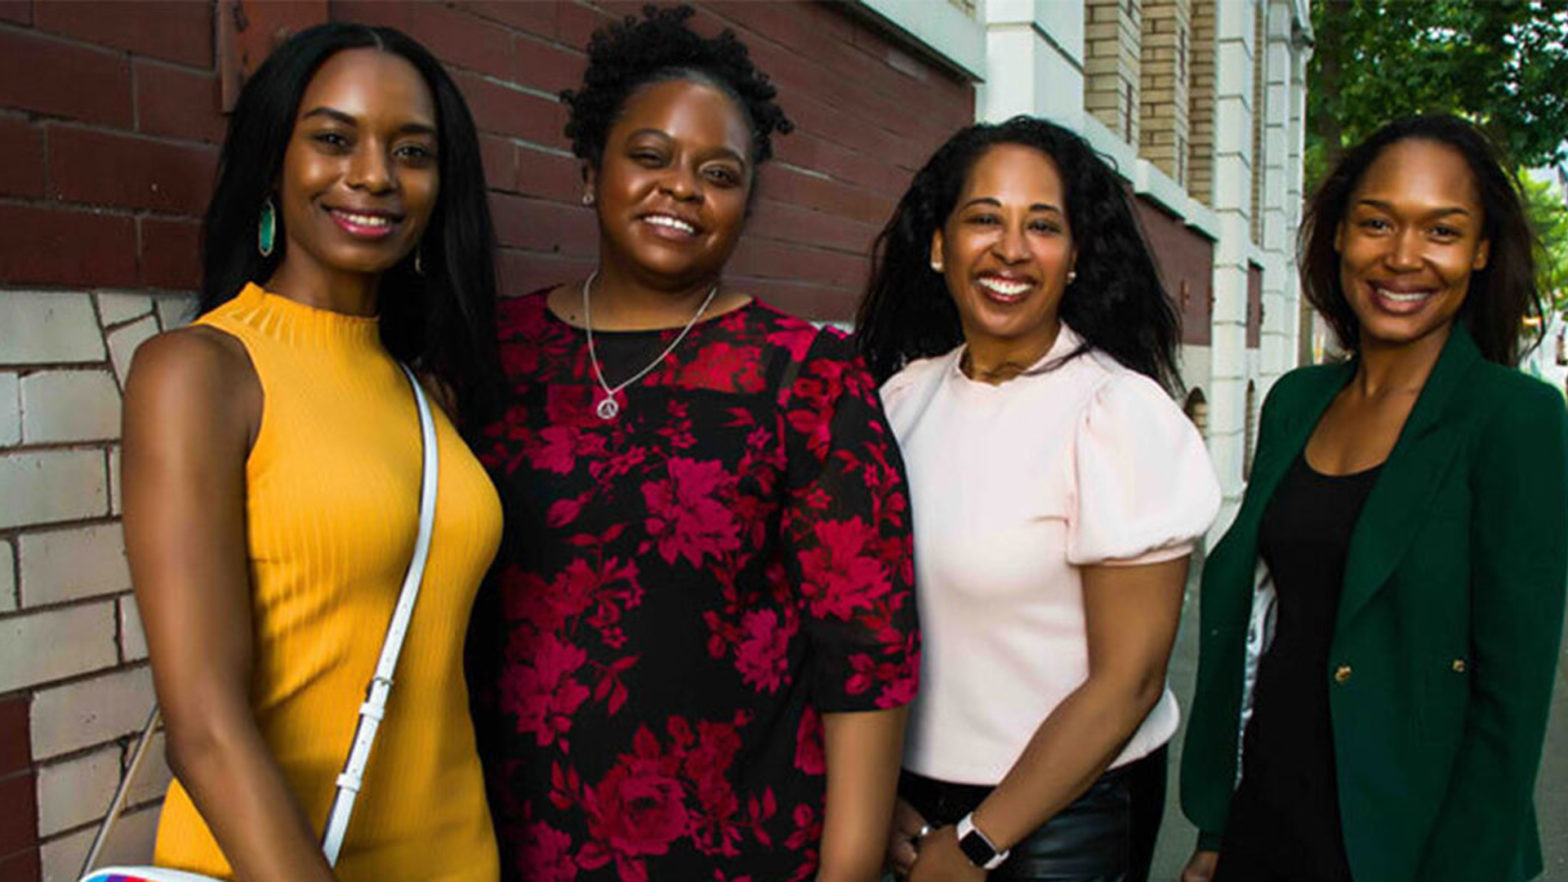 Black Future Co-Op Fund To Award $1.05M In 'We See You' Grants To Black Women-Led Organizations